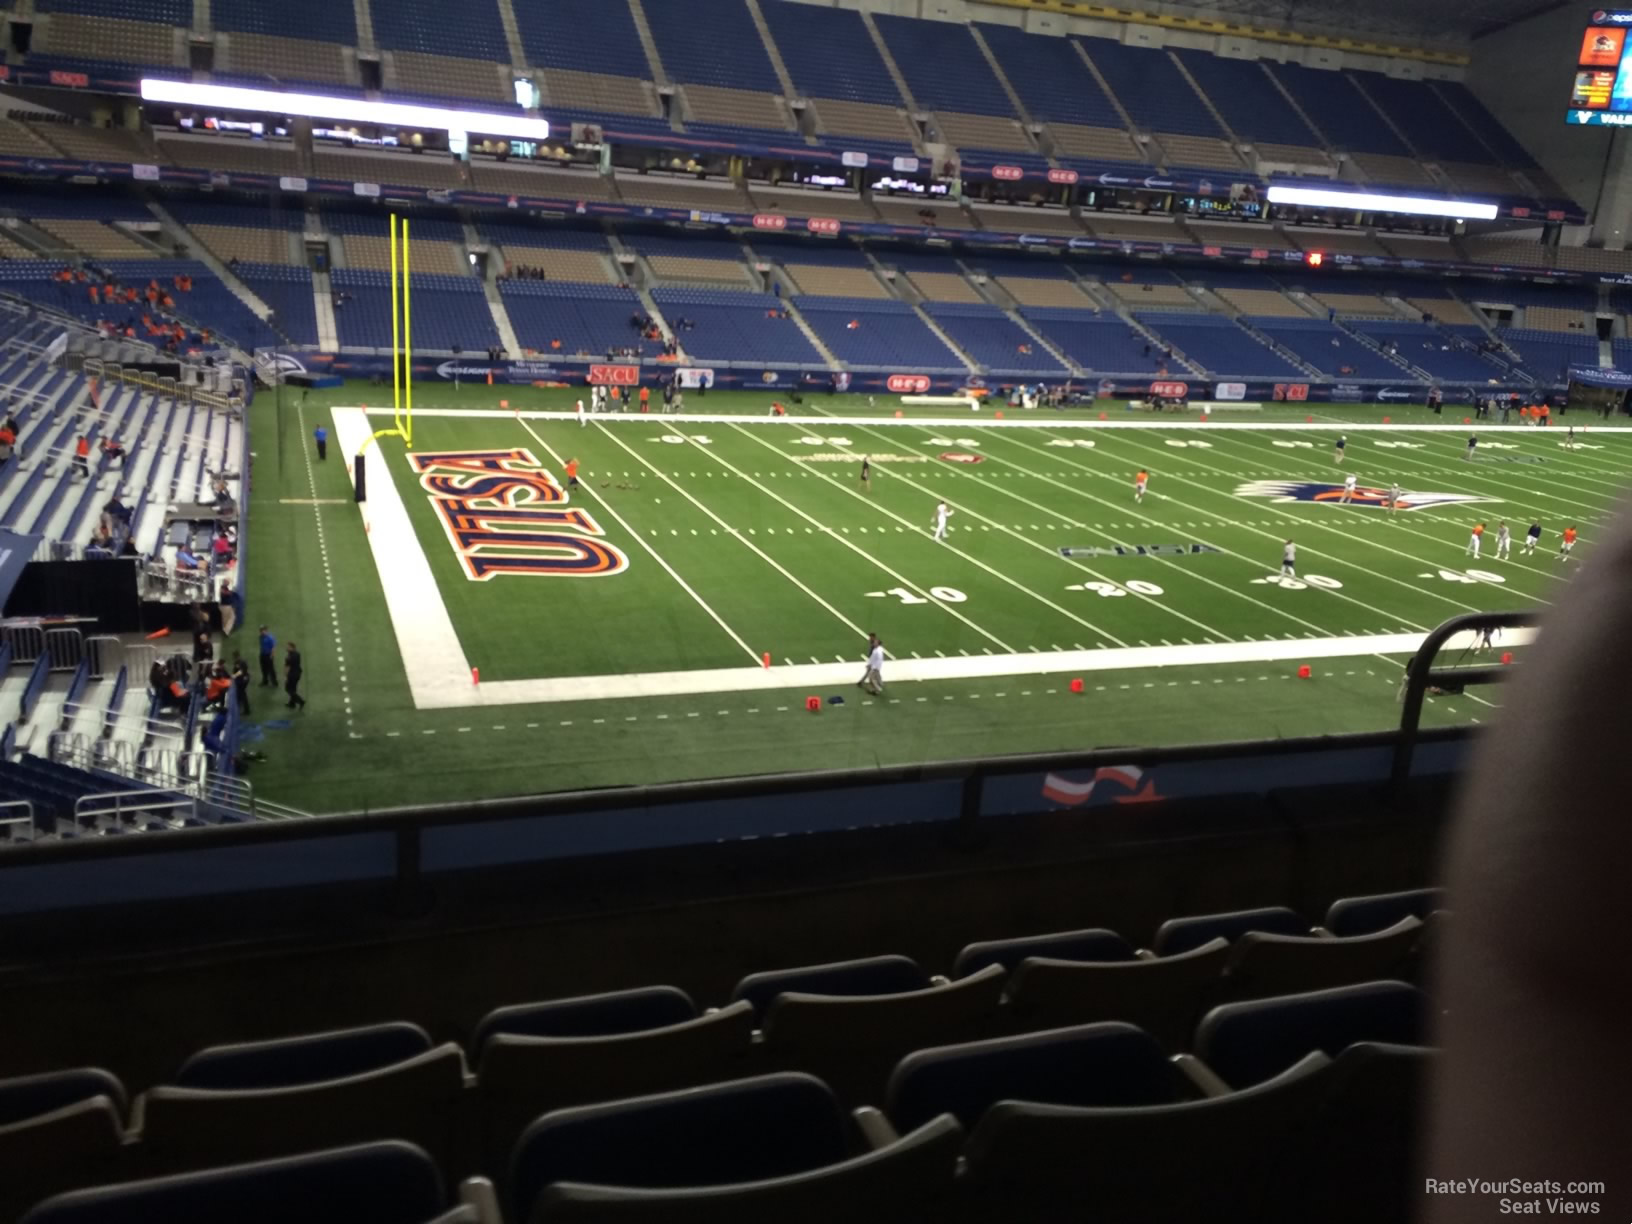 section 217, row 5 seat view  for football - alamodome